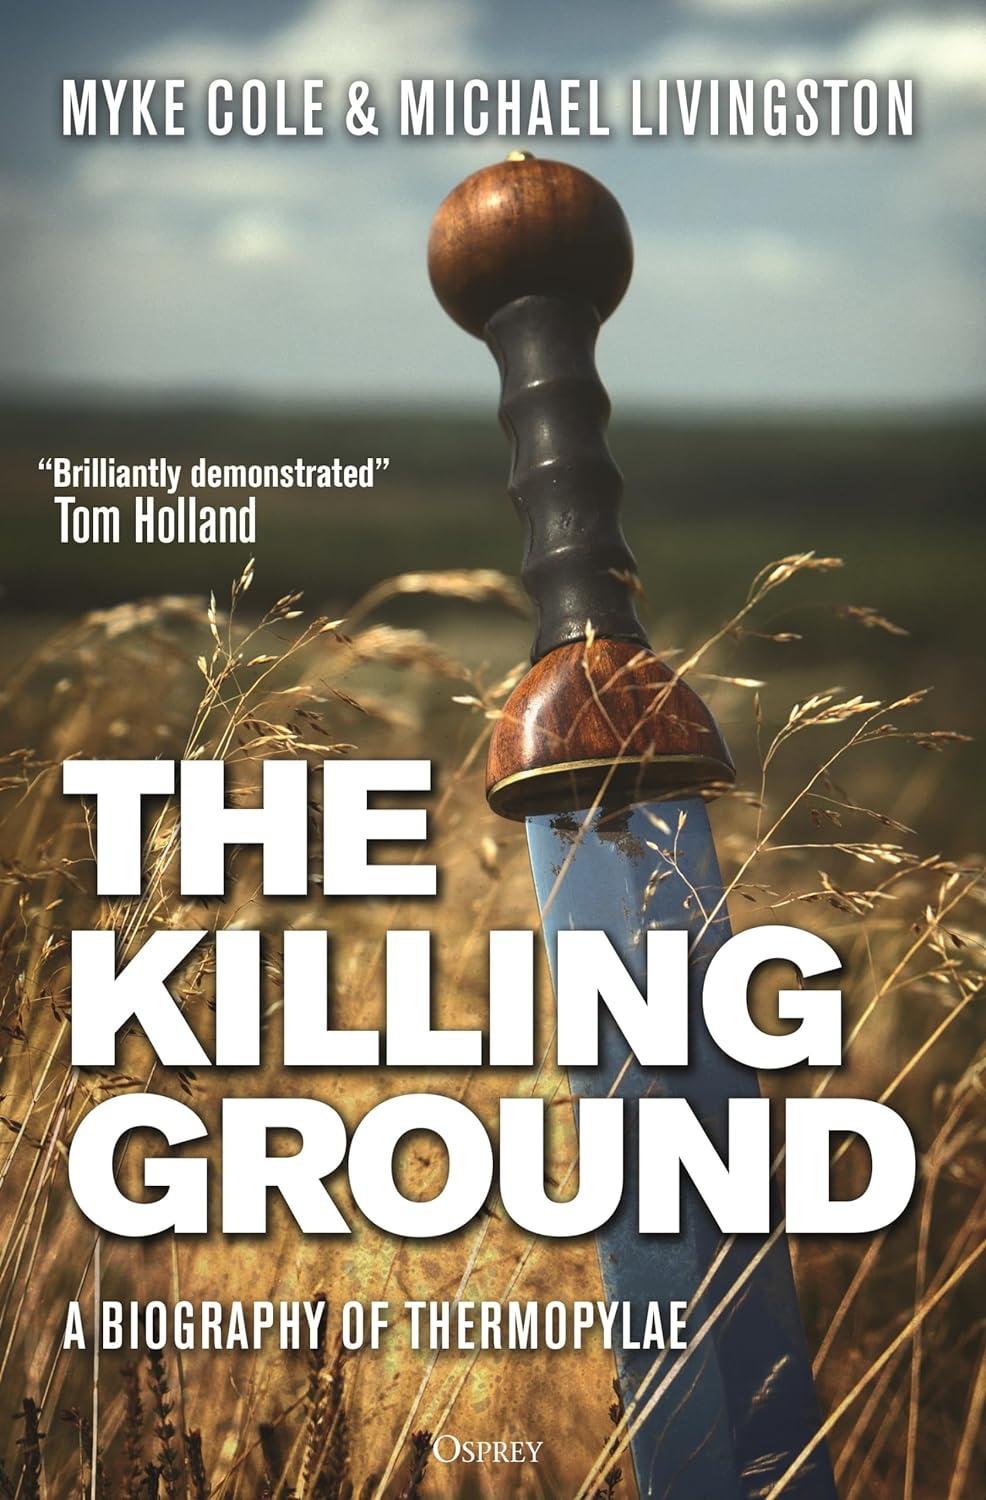 "The Killing Ground: A Biography of Thermopylae," by Myke Cole and Michael Livingston.